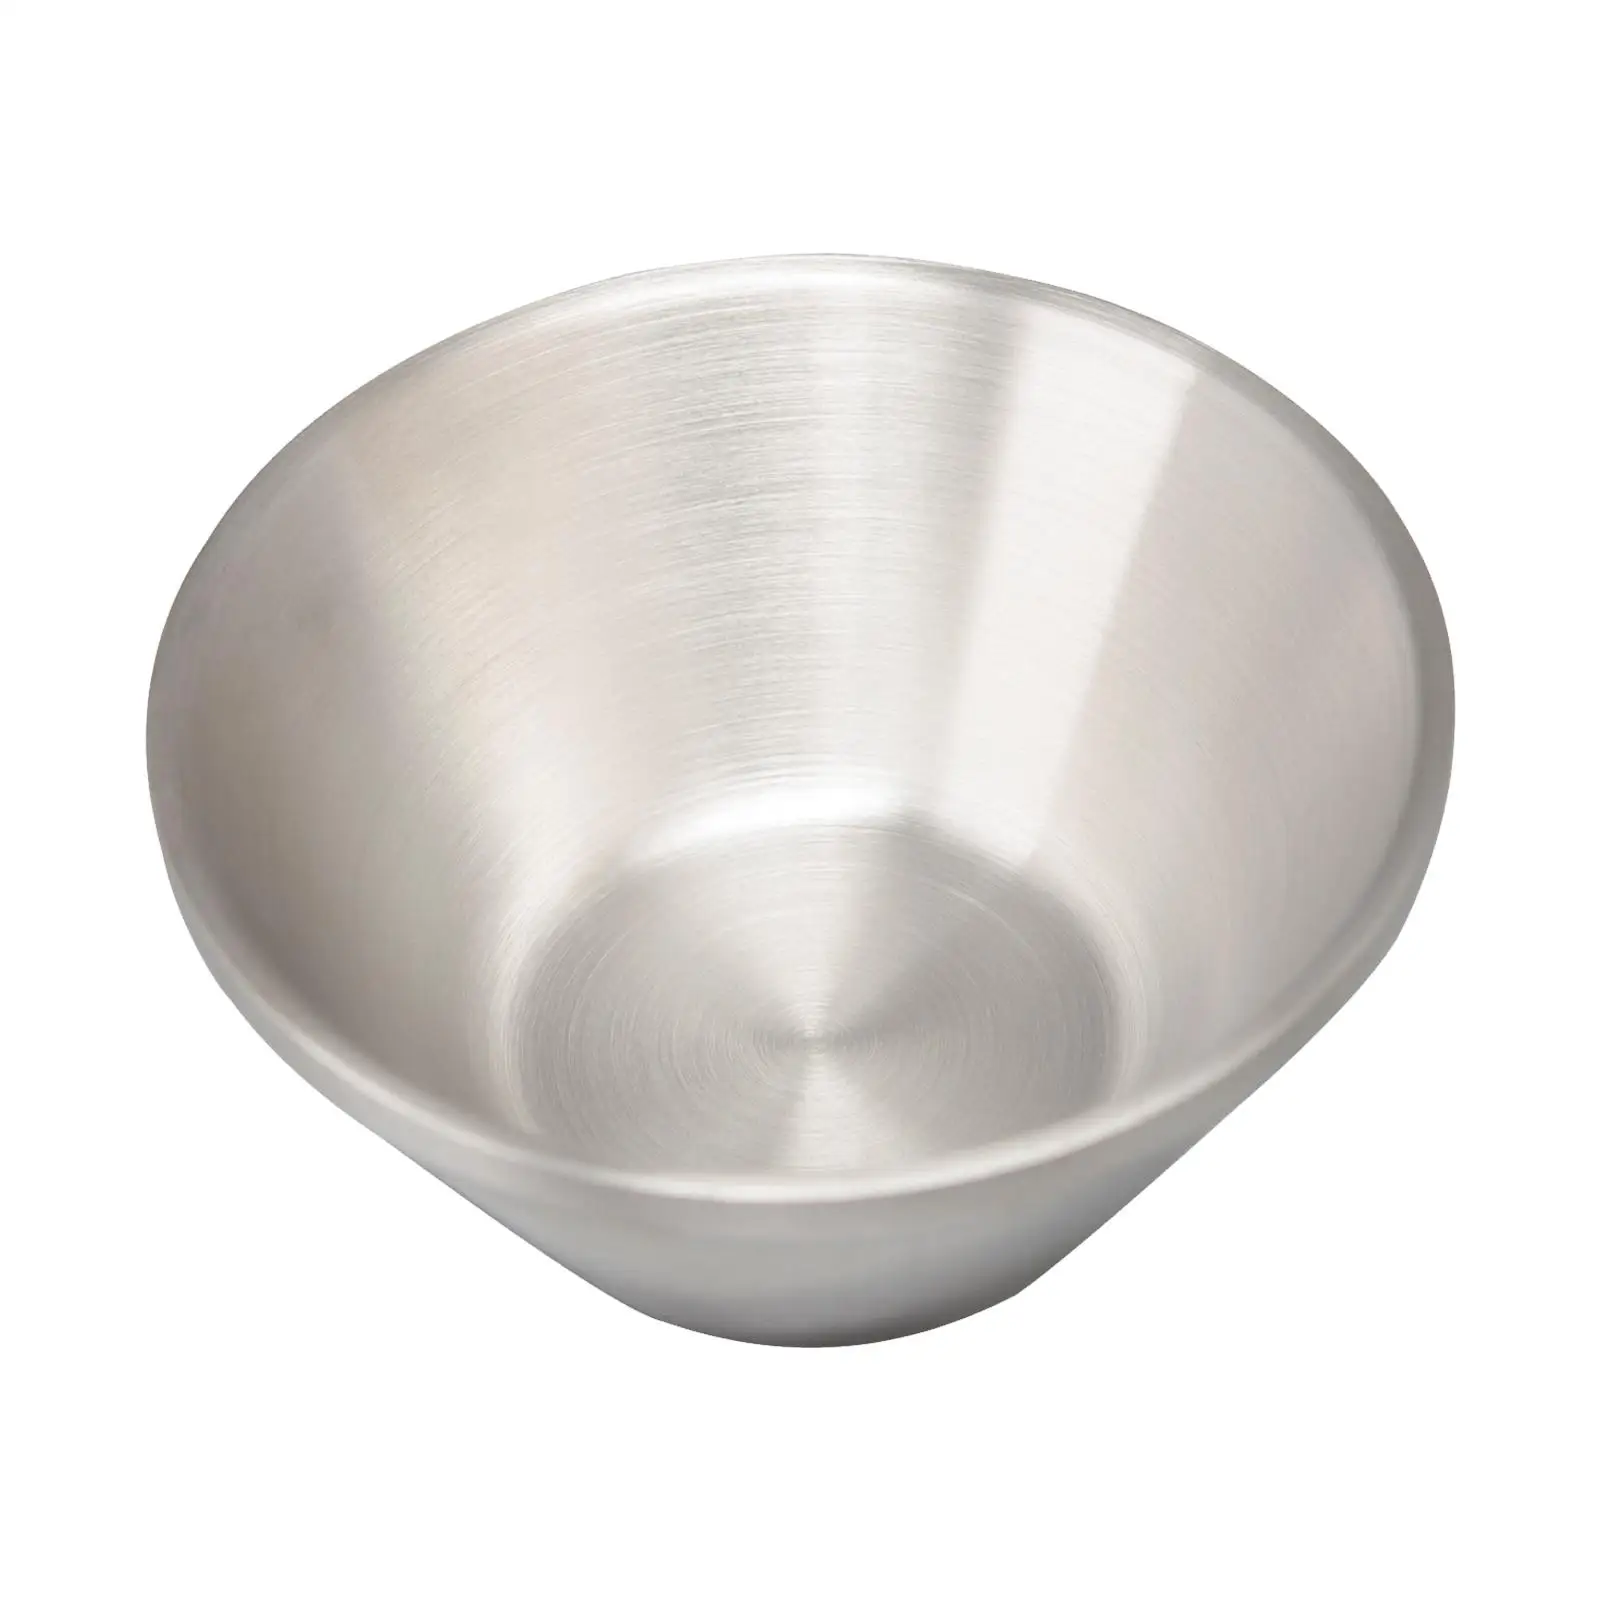 Stainless Steel Shaving Bowl Shave Soap Cup Heavy Duty Mixing Bowl Durable Shave Soap Bowl Provides A Luxurious Shave Experience